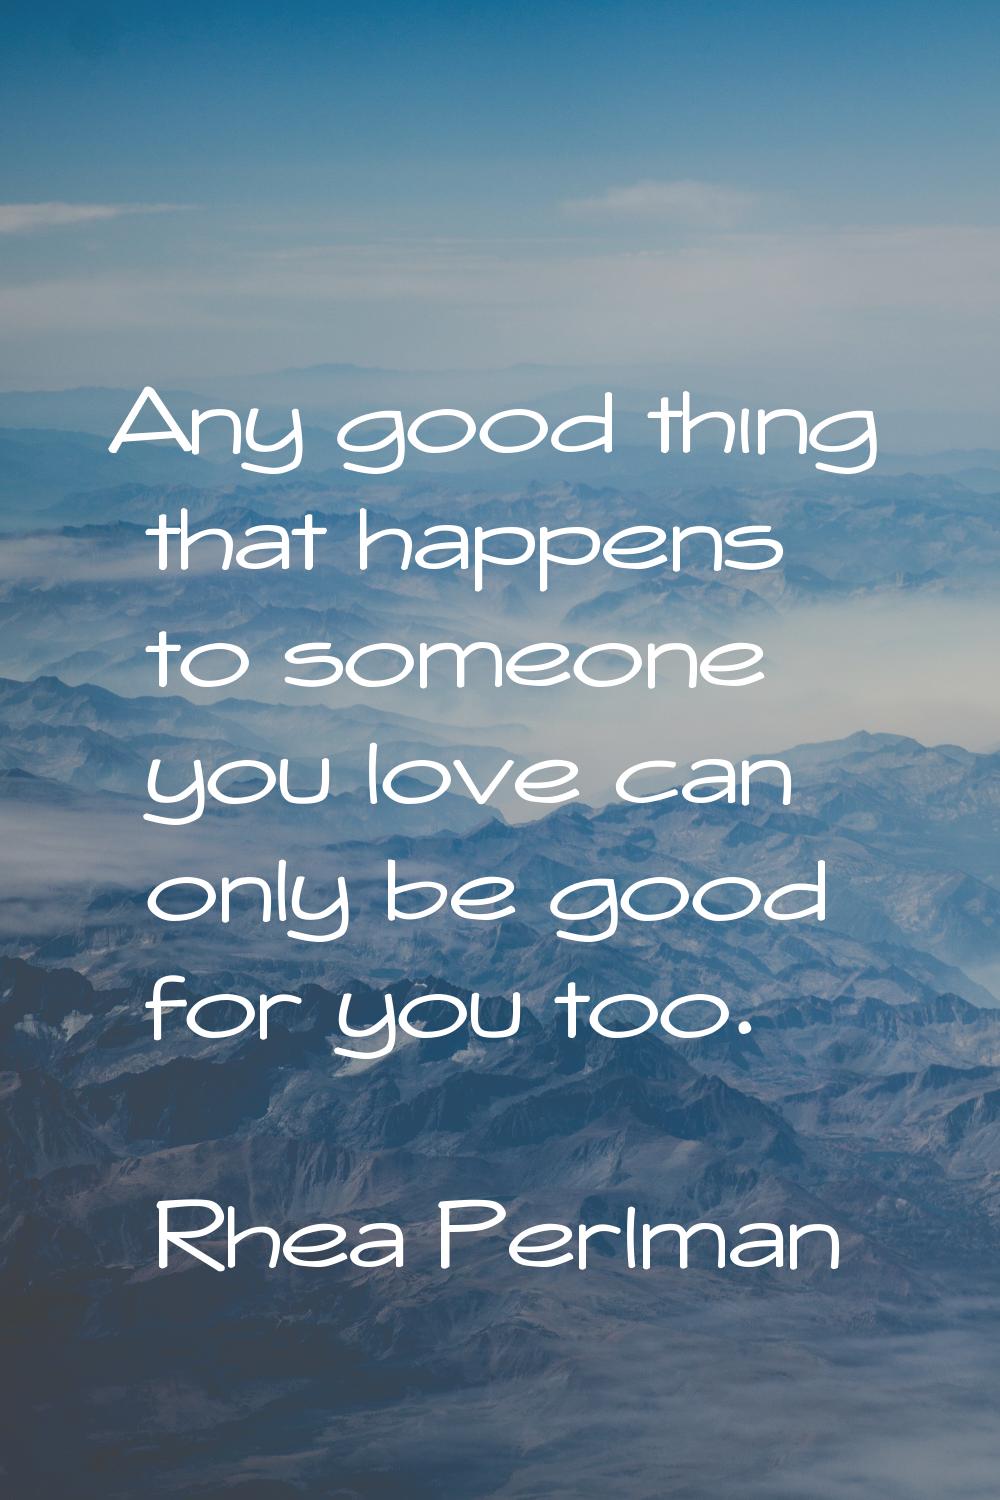 Any good thing that happens to someone you love can only be good for you too.